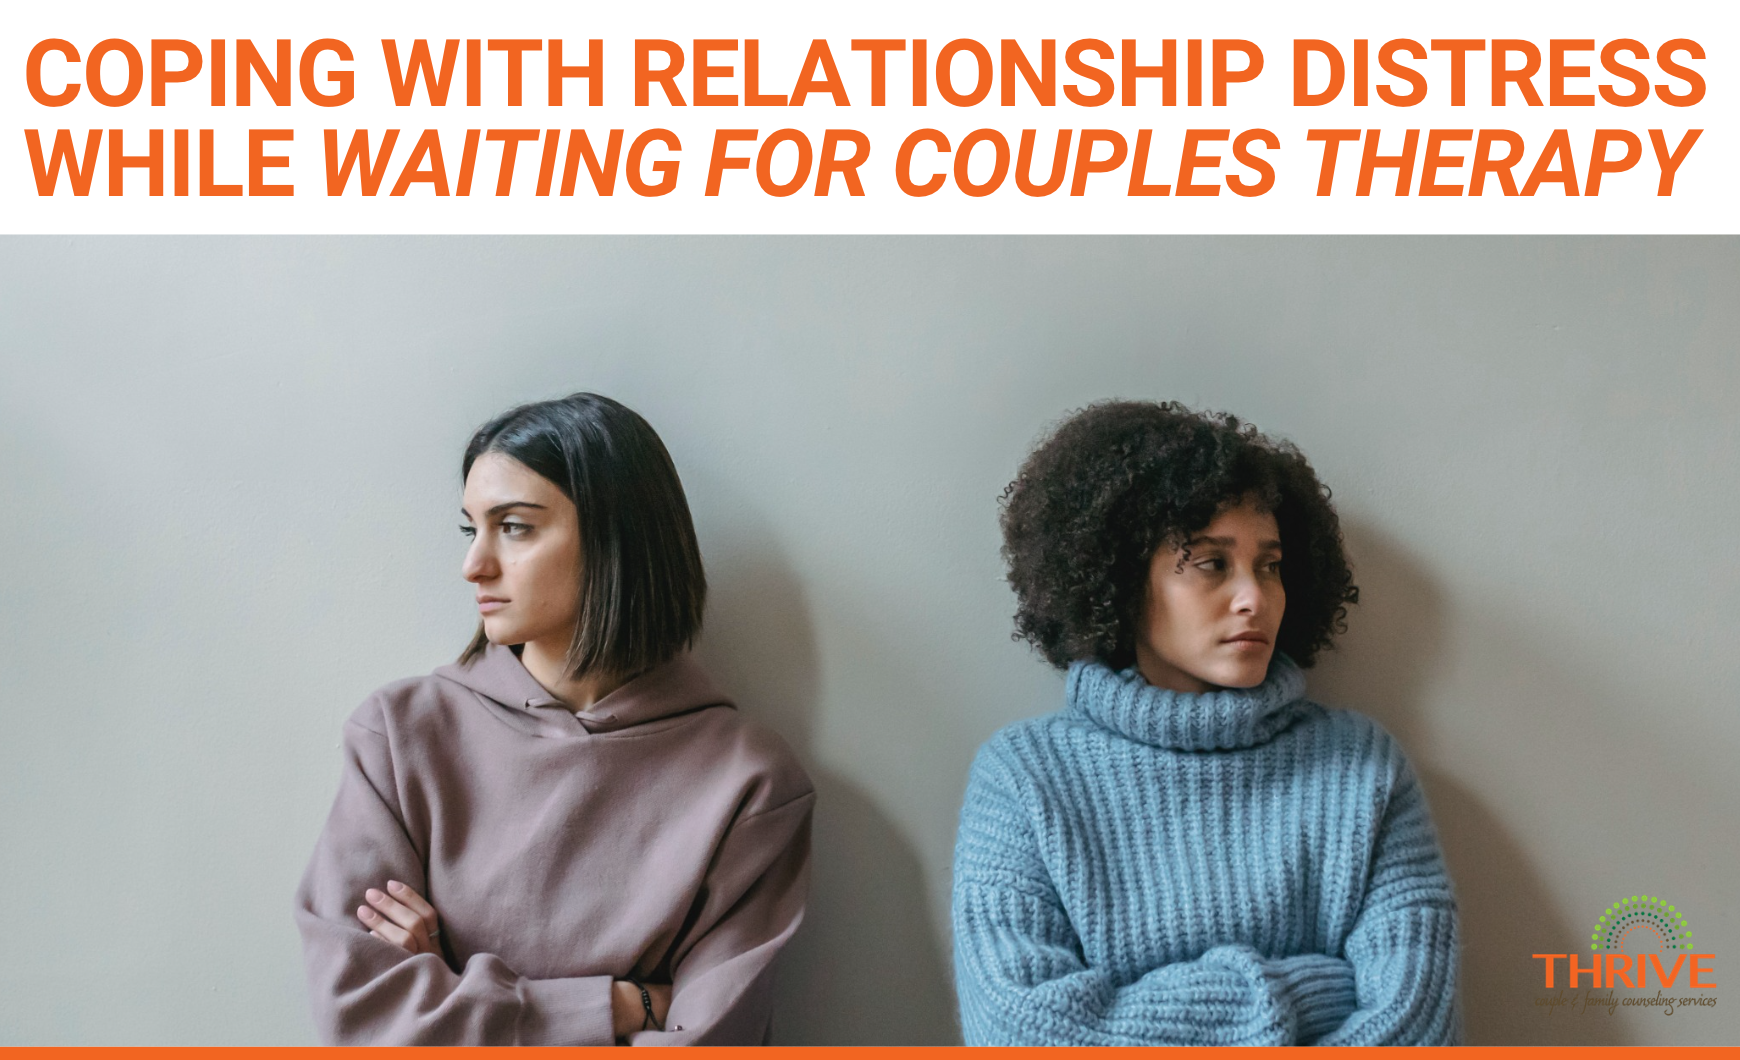 A graphic from Thrive Family Services in Englewood that reads "Coping With Relationship Distress while Waiting for Couples Therapy" above a stock photo of an unhappy looking lesbian couple sitting in front of a beige wall.